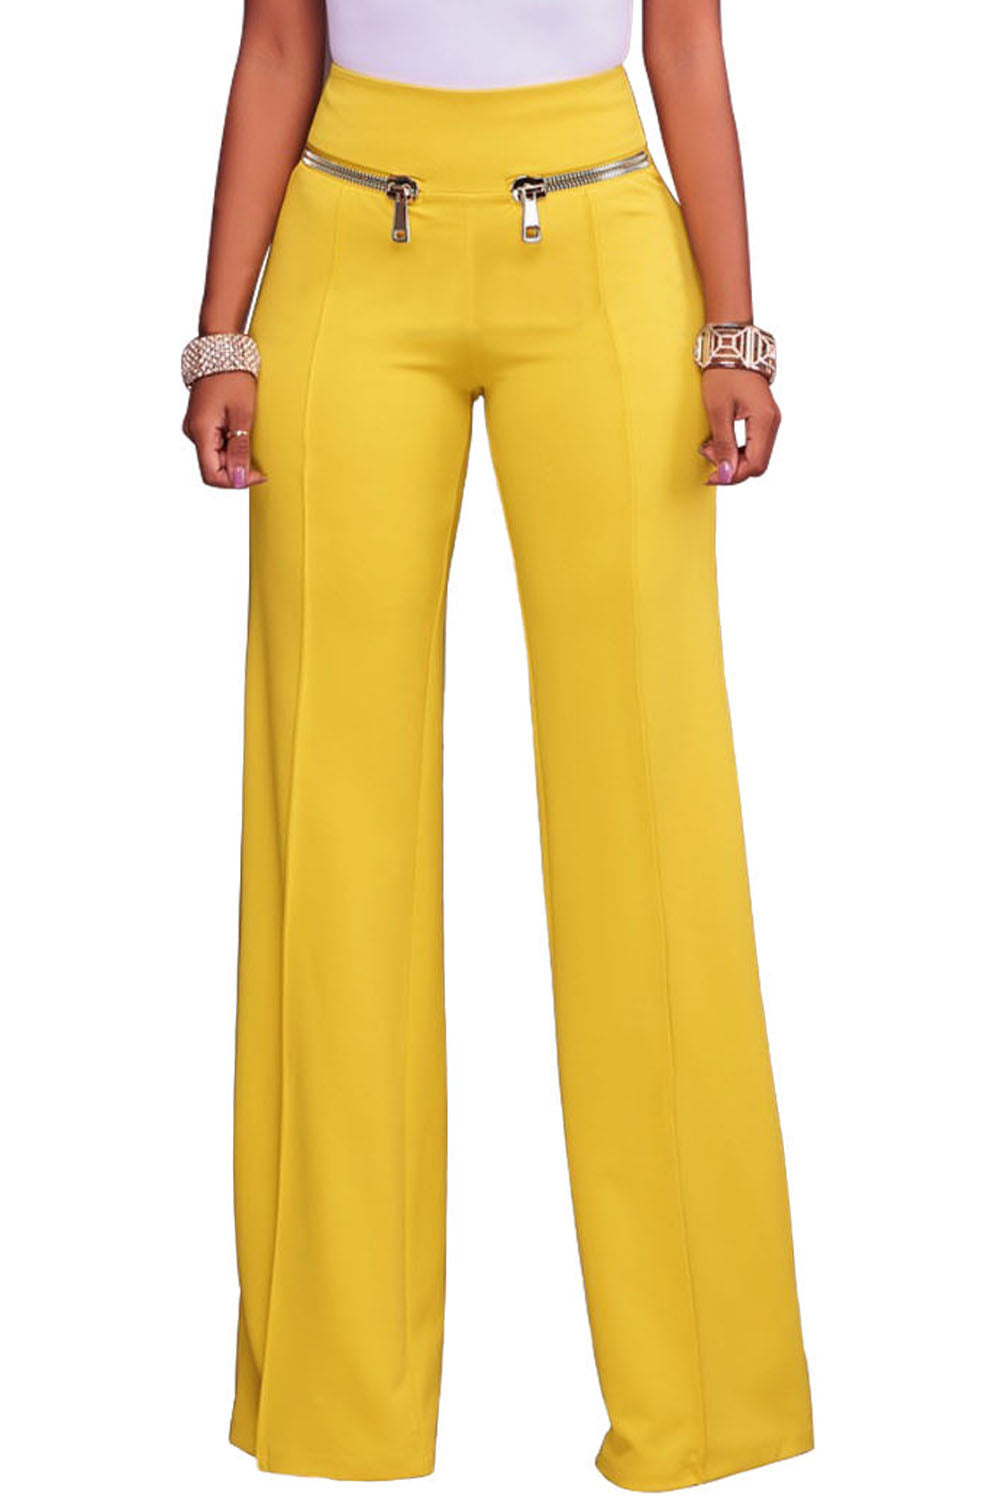 zuwimk Wide Leg Pants For Women,Womens High Waisted Ruffle Flare Fit Pants  Solid Color Wide Leg Trousers Yellow,3XL - Walmart.com